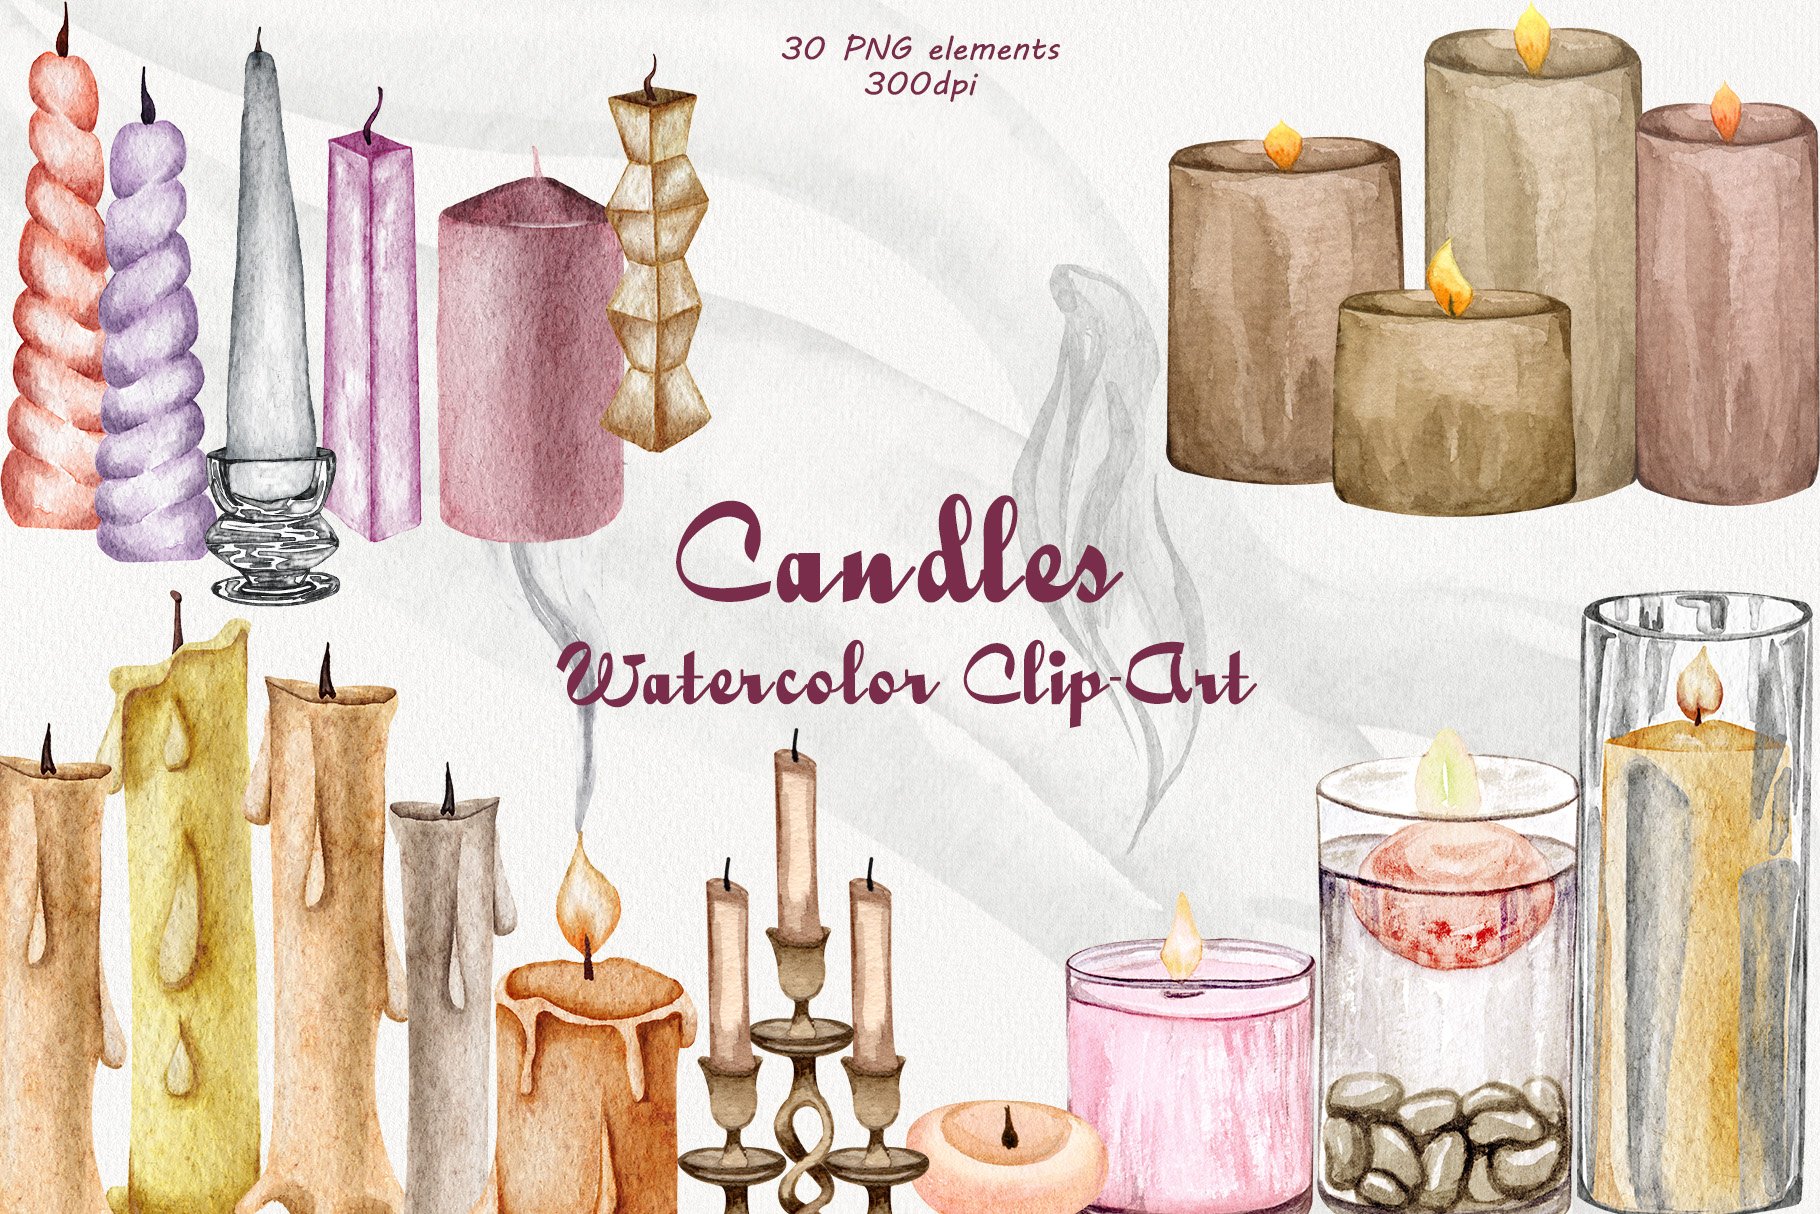 Candles Watercolor Clipart cover image.